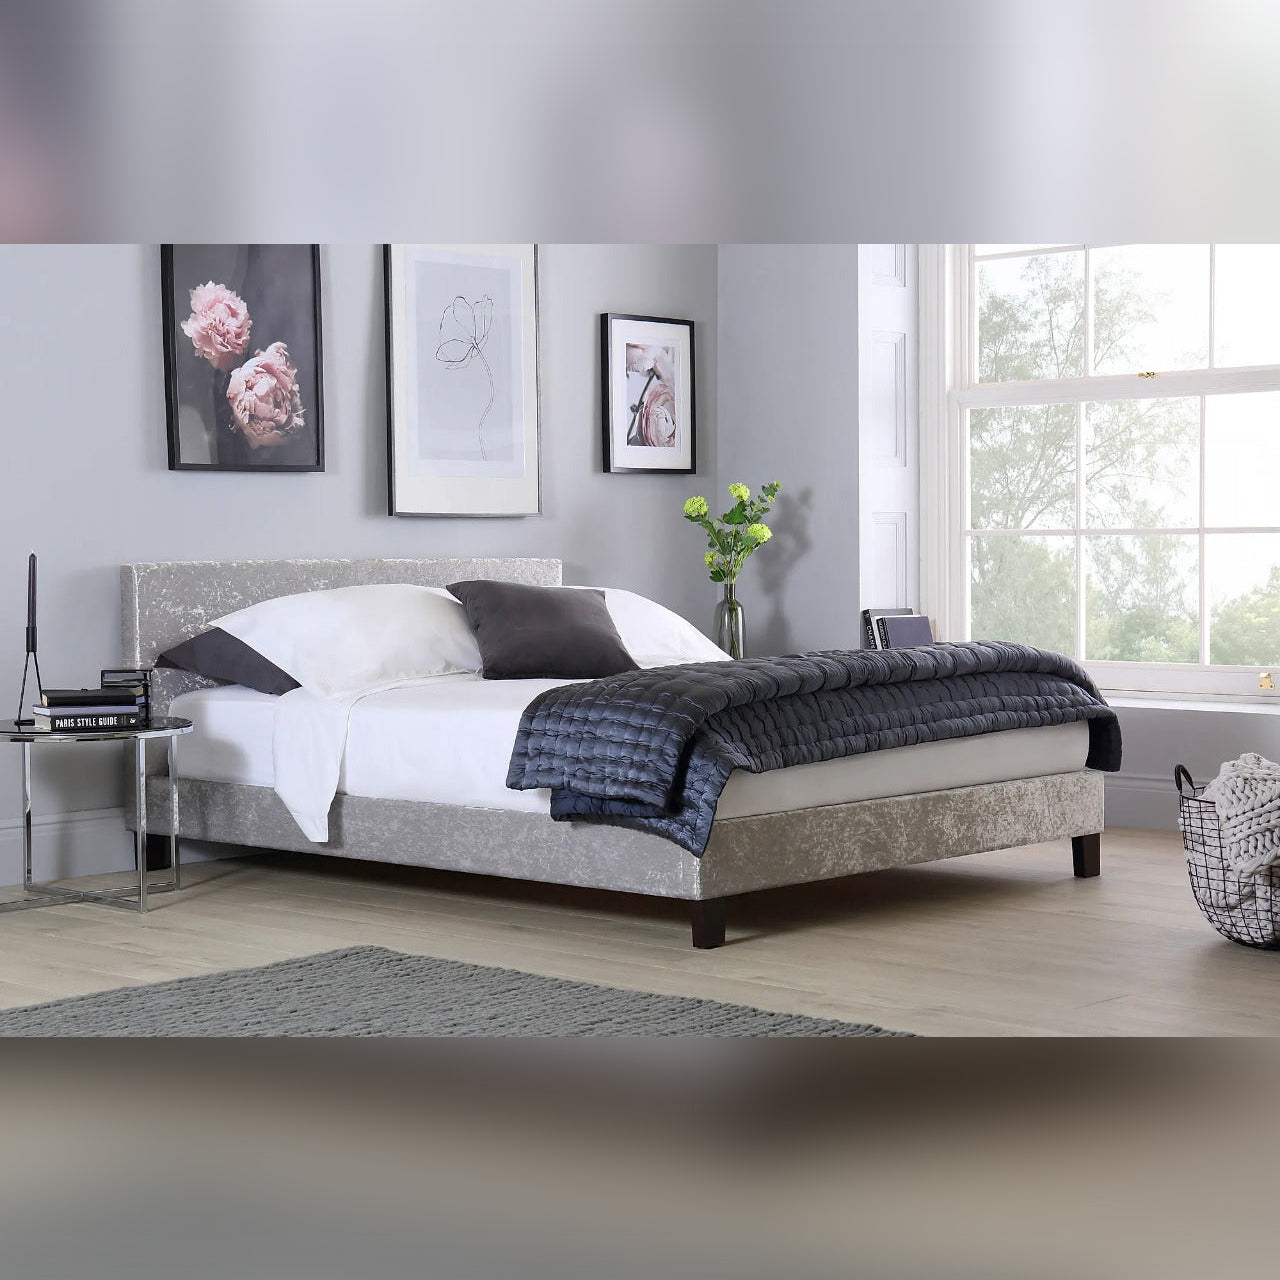 King Size Bed Berlin Style Silver Crushed Velvet Bed